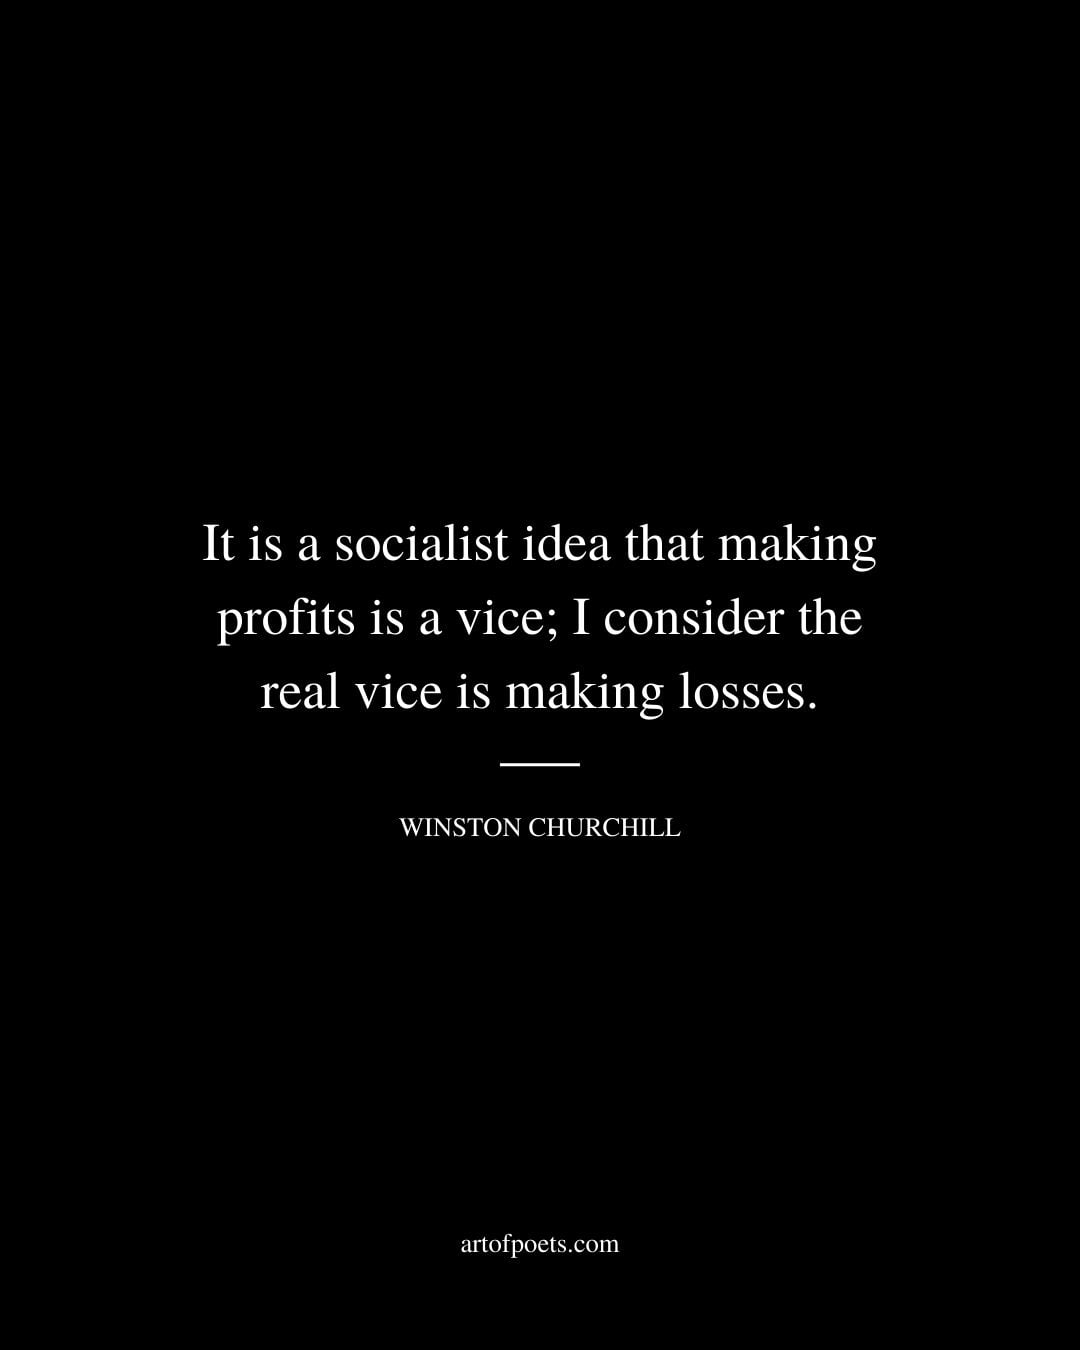 It is a socialist idea that making profits is a vice I consider the real vice is making losses